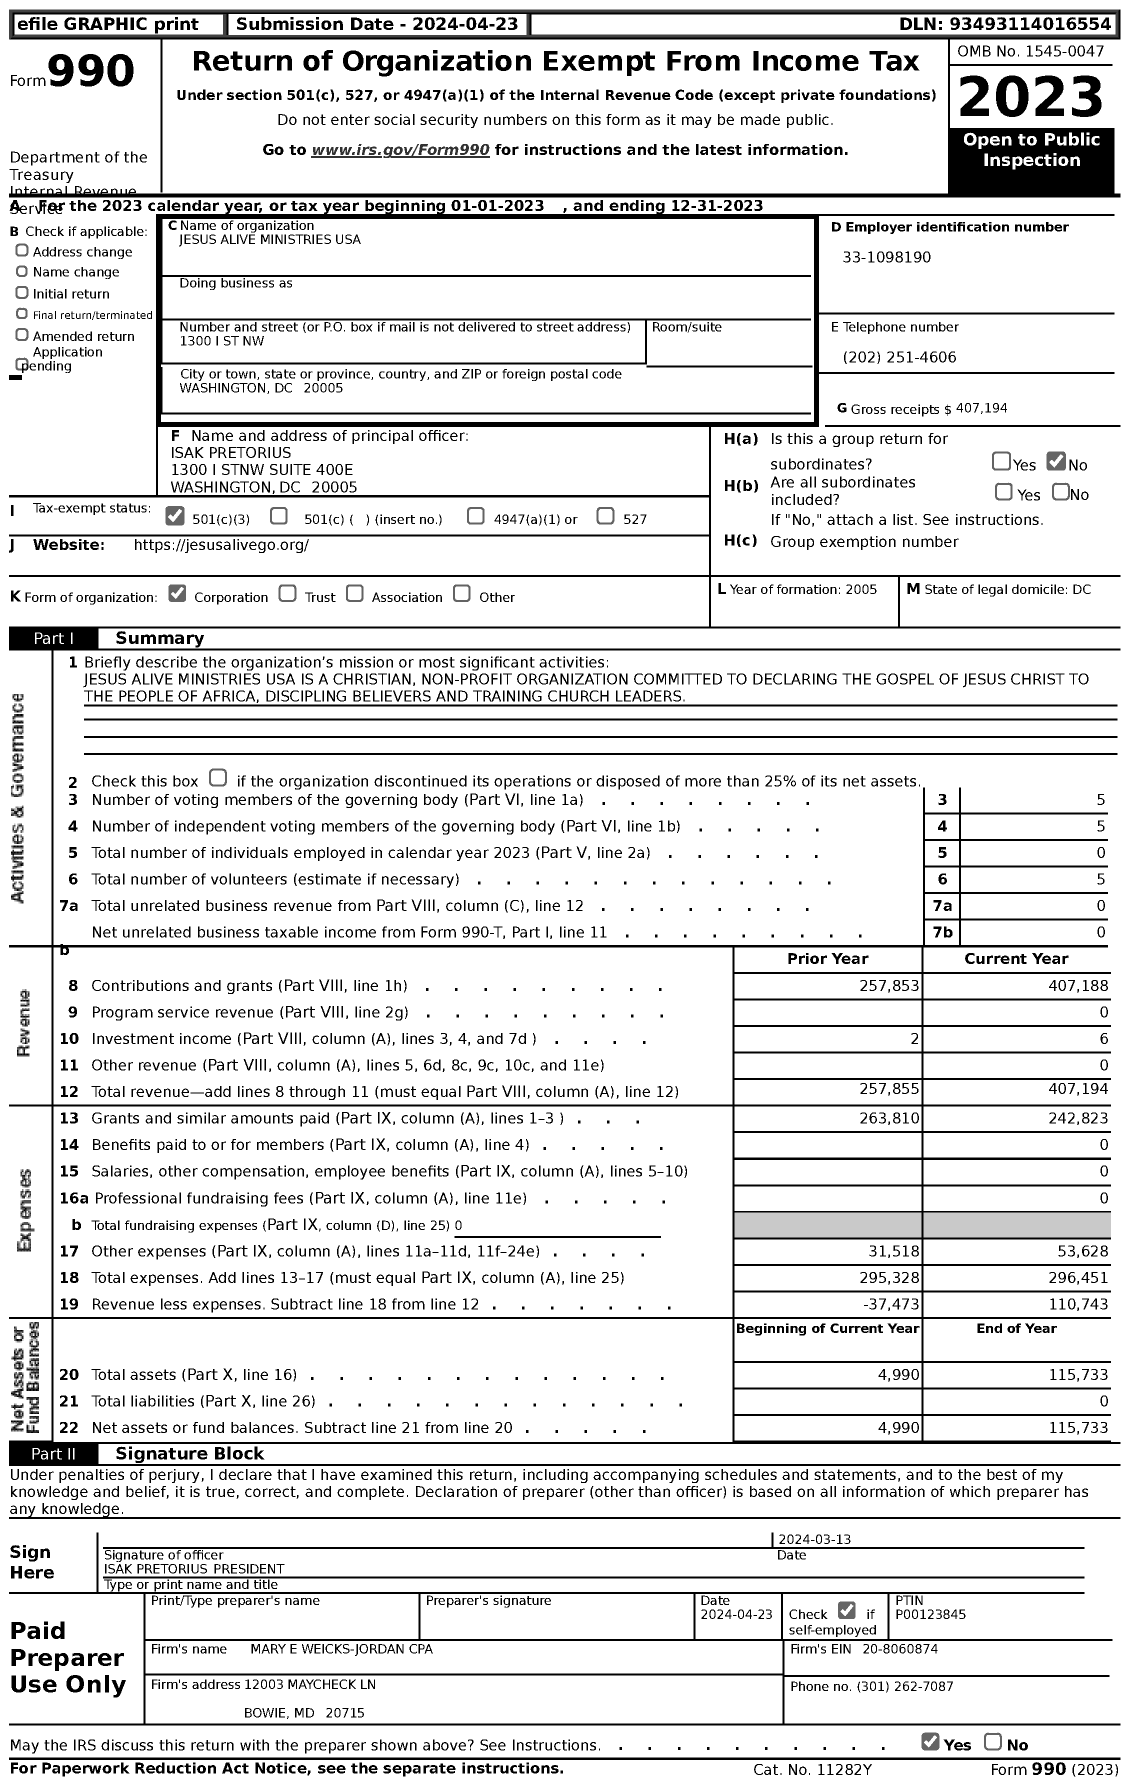 Image of first page of 2023 Form 990 for Jesus Alive Ministries USA